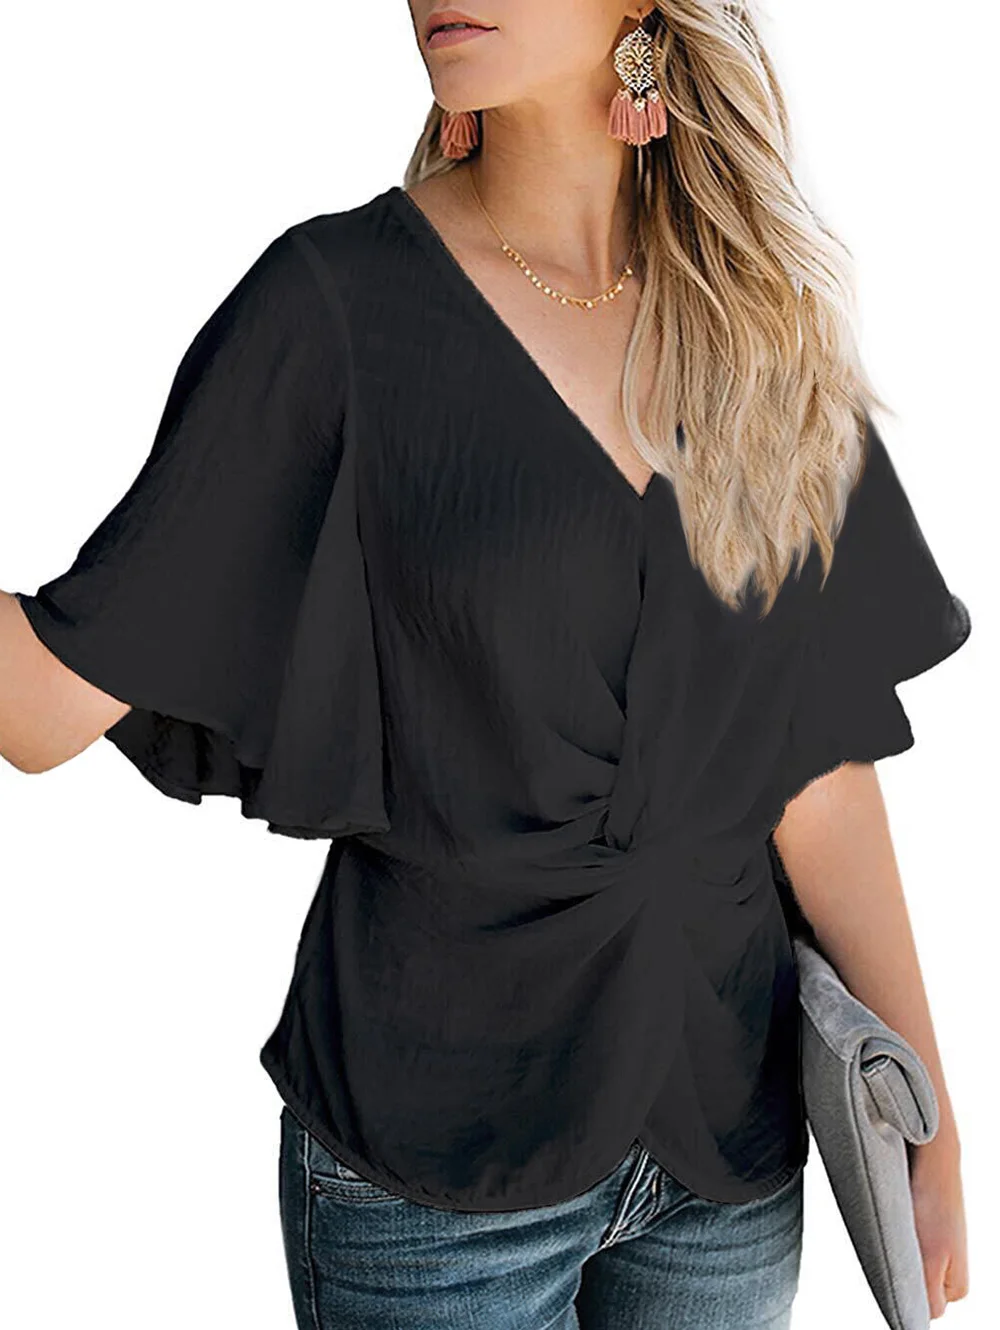 Kenancy Butterfly Sleeve V Neck Twist Blouse Women Spring Summer Casual Blouses Solid Color Black White Ladies Shirts 2019 | Женская